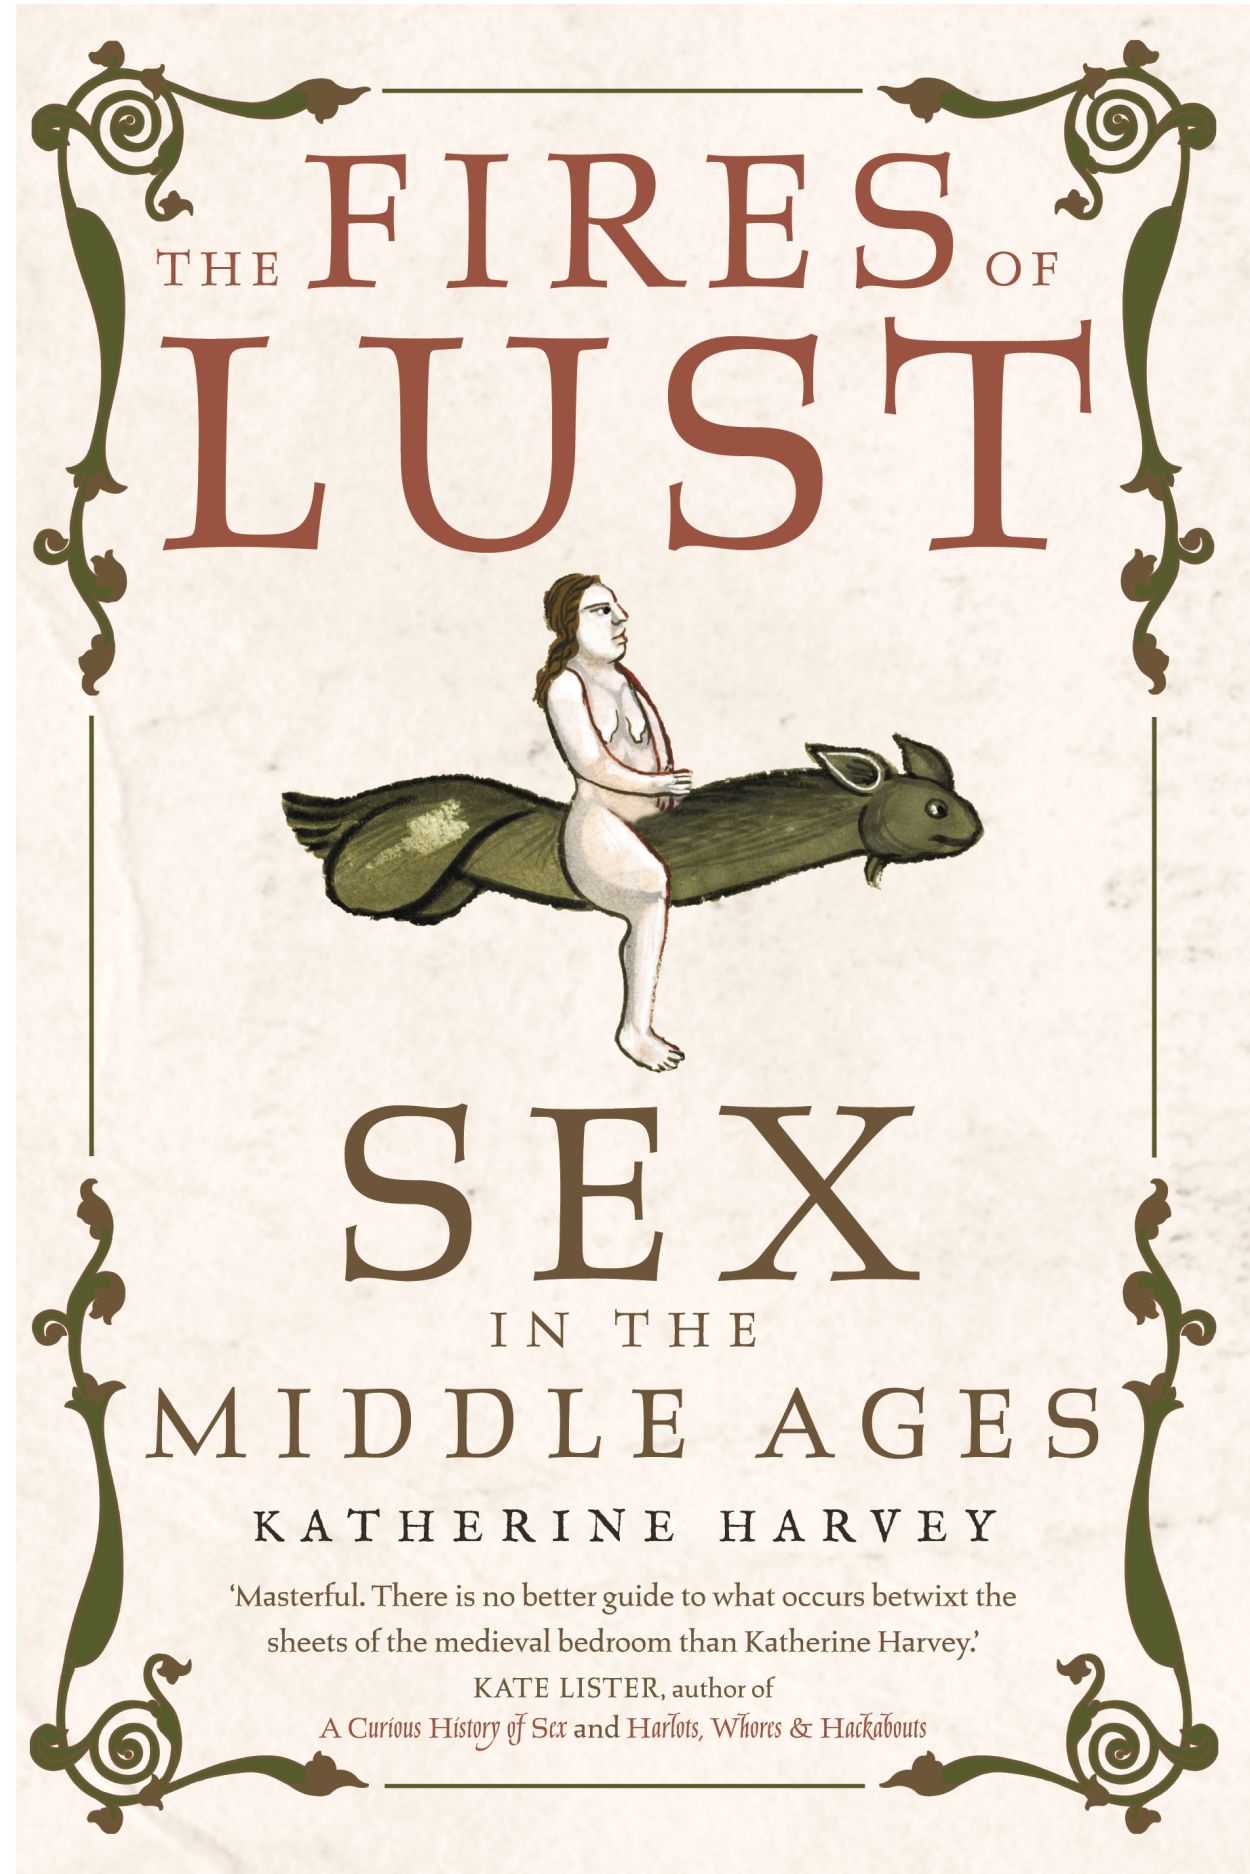 The Fires of Lust Sex in the Middle Ages, Harvey hq nude picture